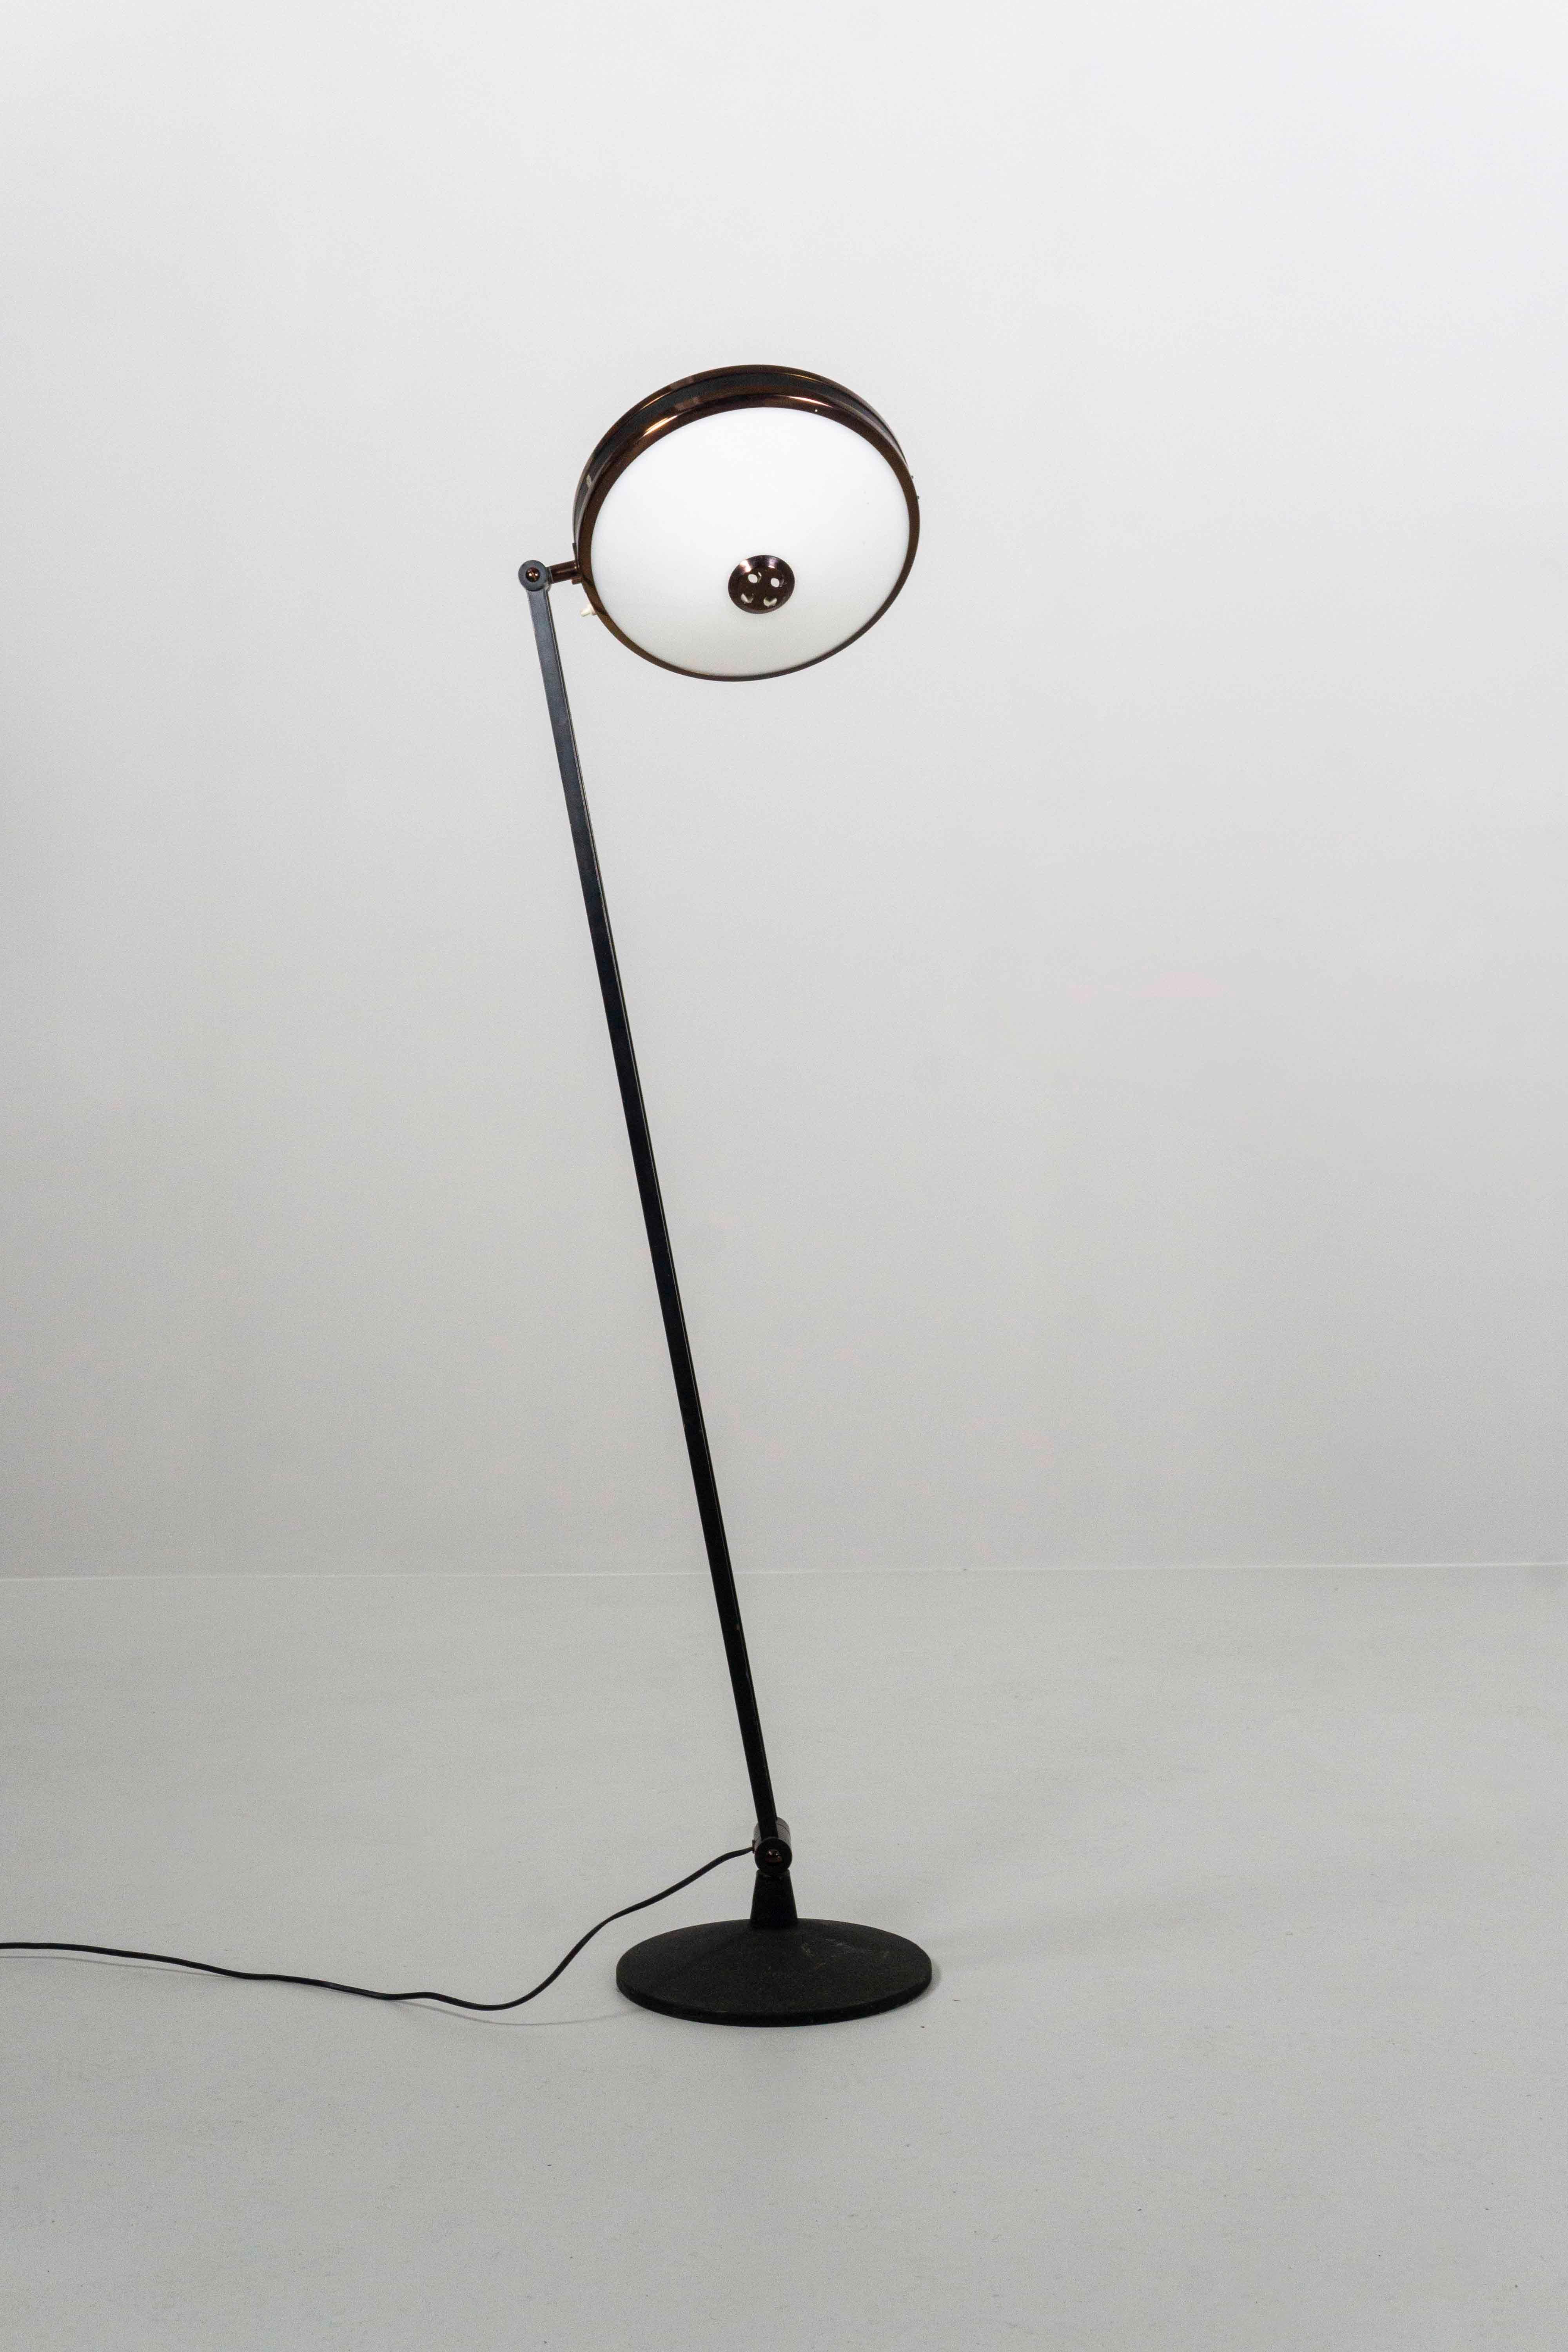 Stilnovo Floor Lamp, Model '4067'
Black-lacquered metal, partly anodized, satined glass
Adjustable

Though Bruno Gatta (1904–76) founded Stilnovo way back in 1946, it is still one of the most instantly recognizable names in lighting. Gatta began his